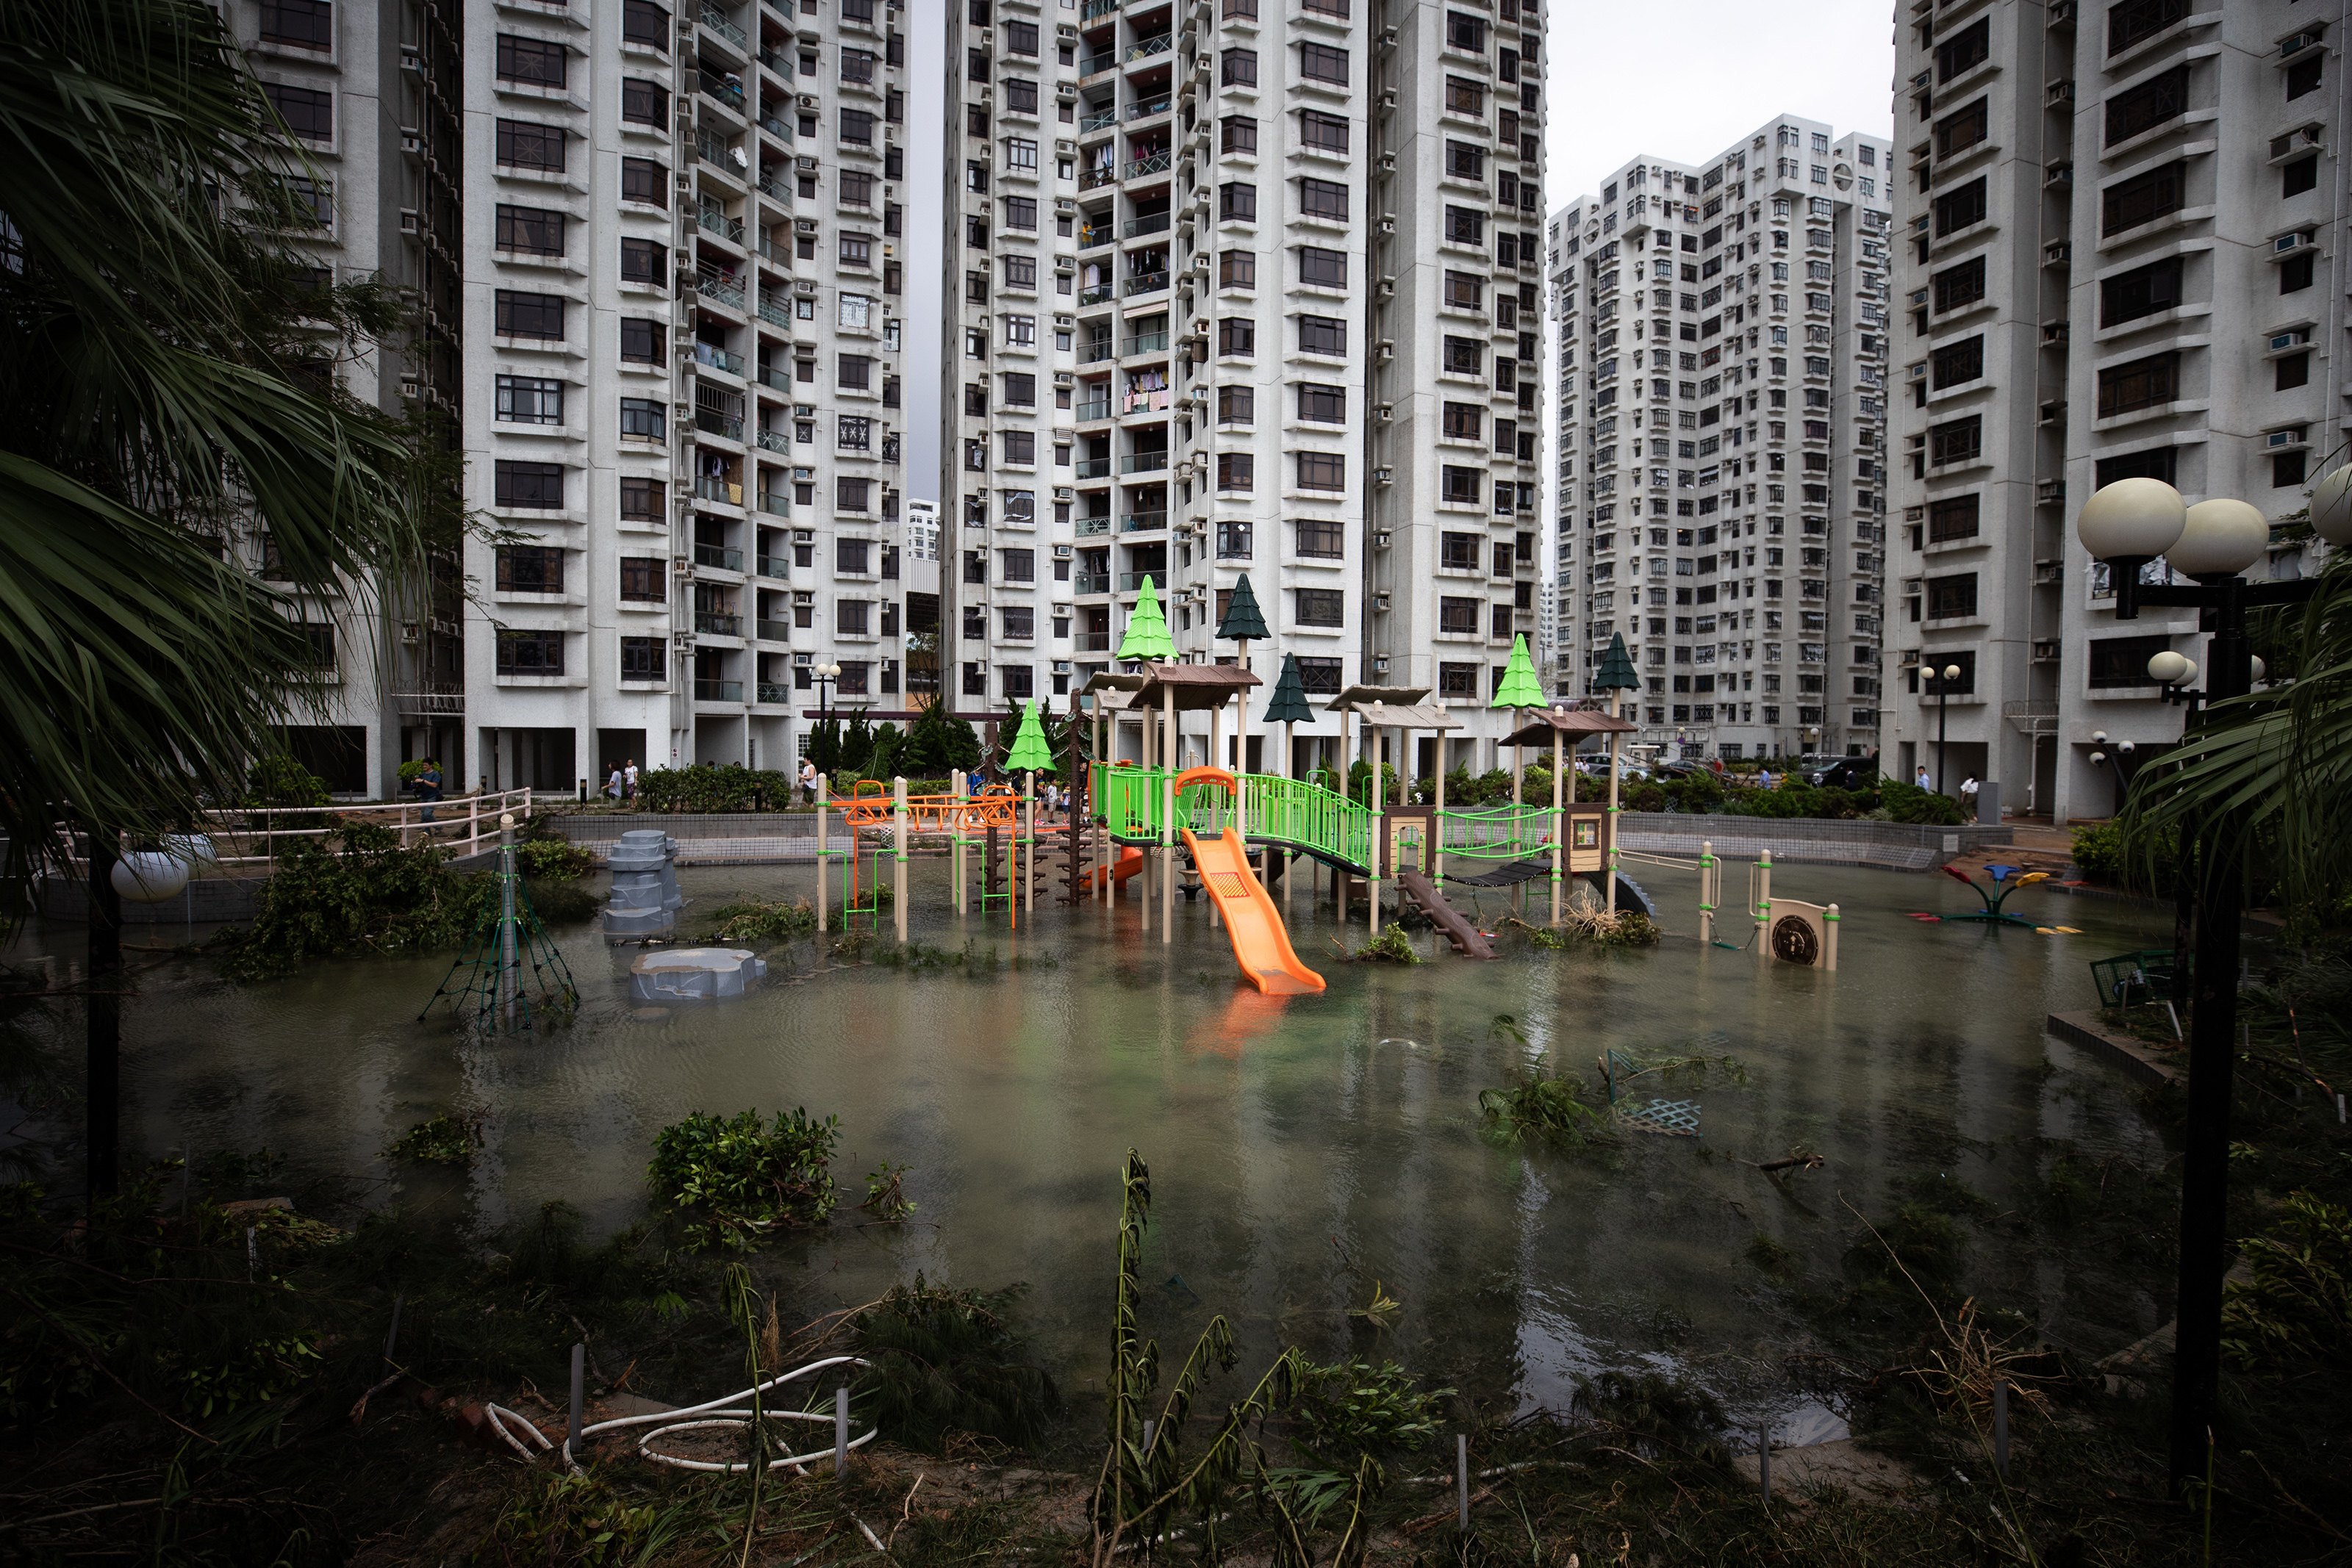 A flooded playground at Heng Fa Chuen, a harbourside housing estate, after Typhoon Mangkhut hit Hong Kong on September 16, 2018. The typhoon triggered insurance claims costing more than HK$2 billion. Photo: Winson Wong 